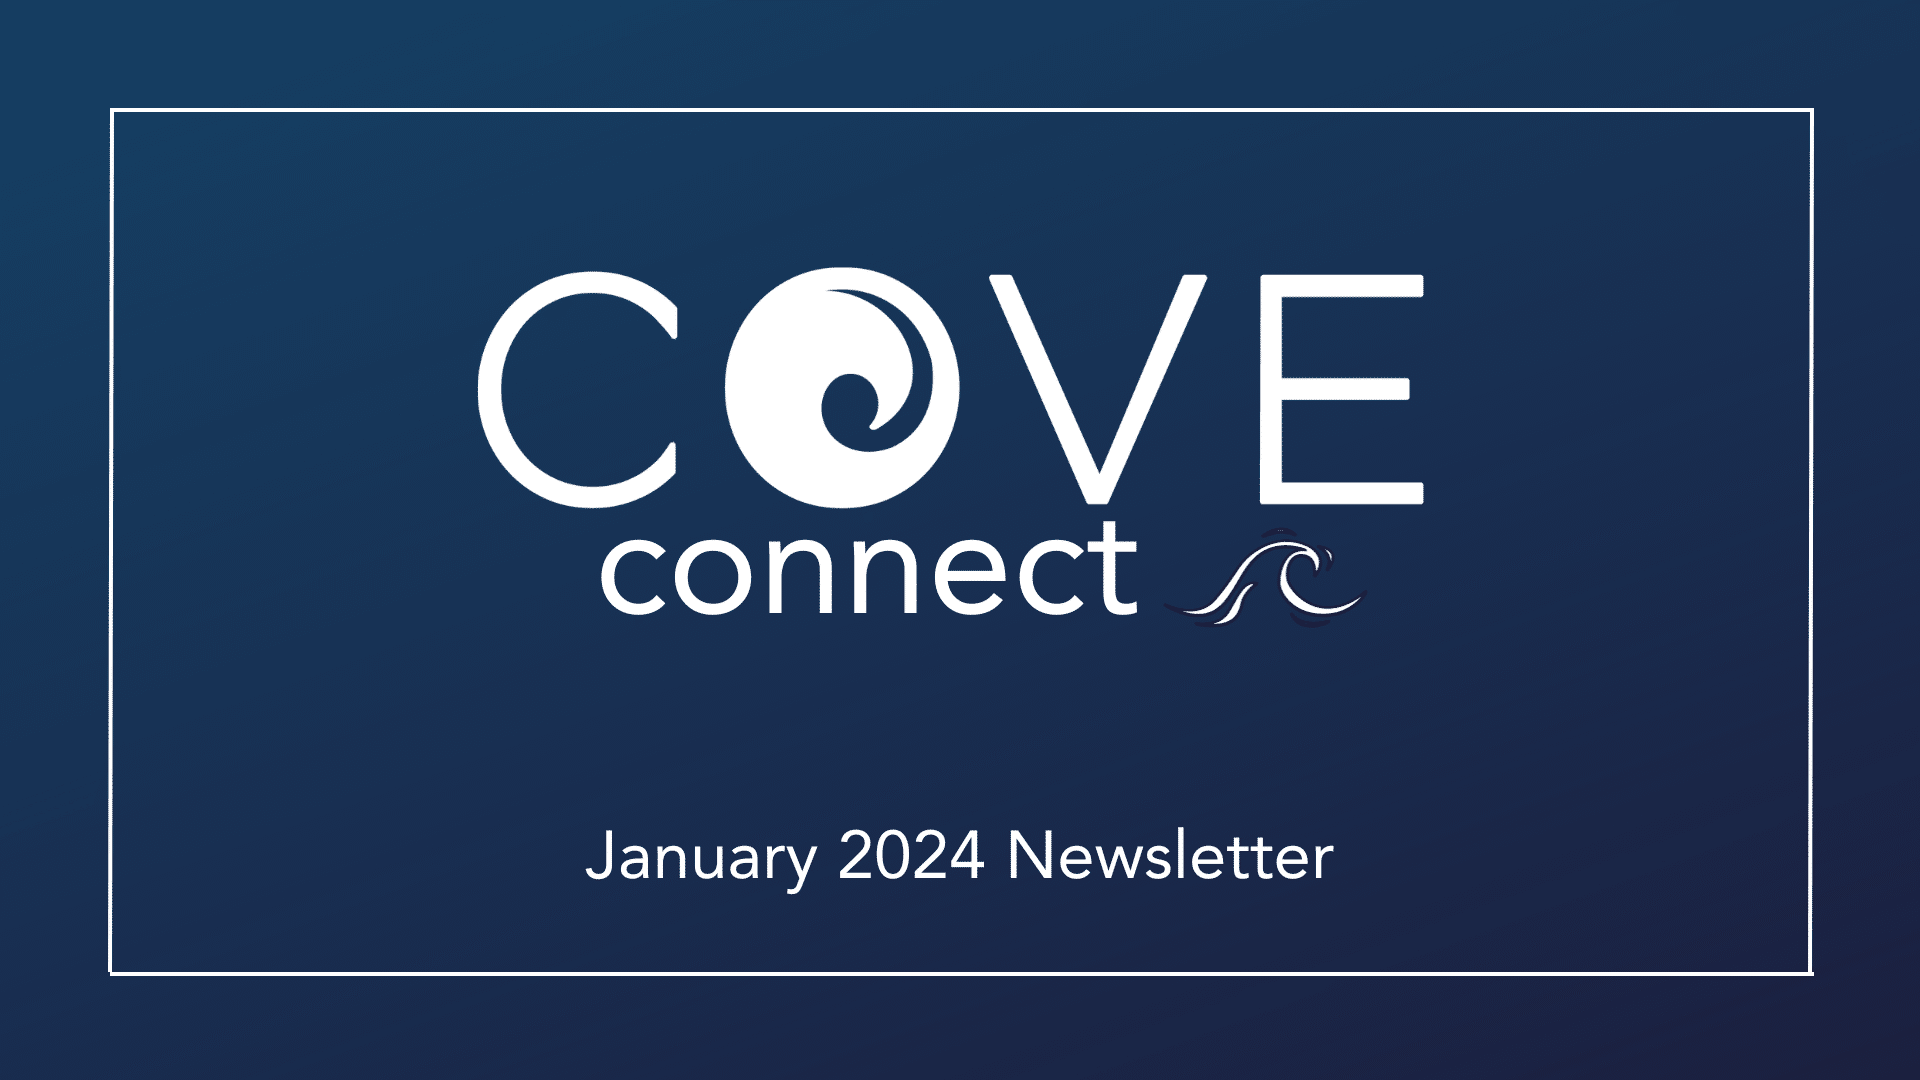 COVE Connect | January 2024